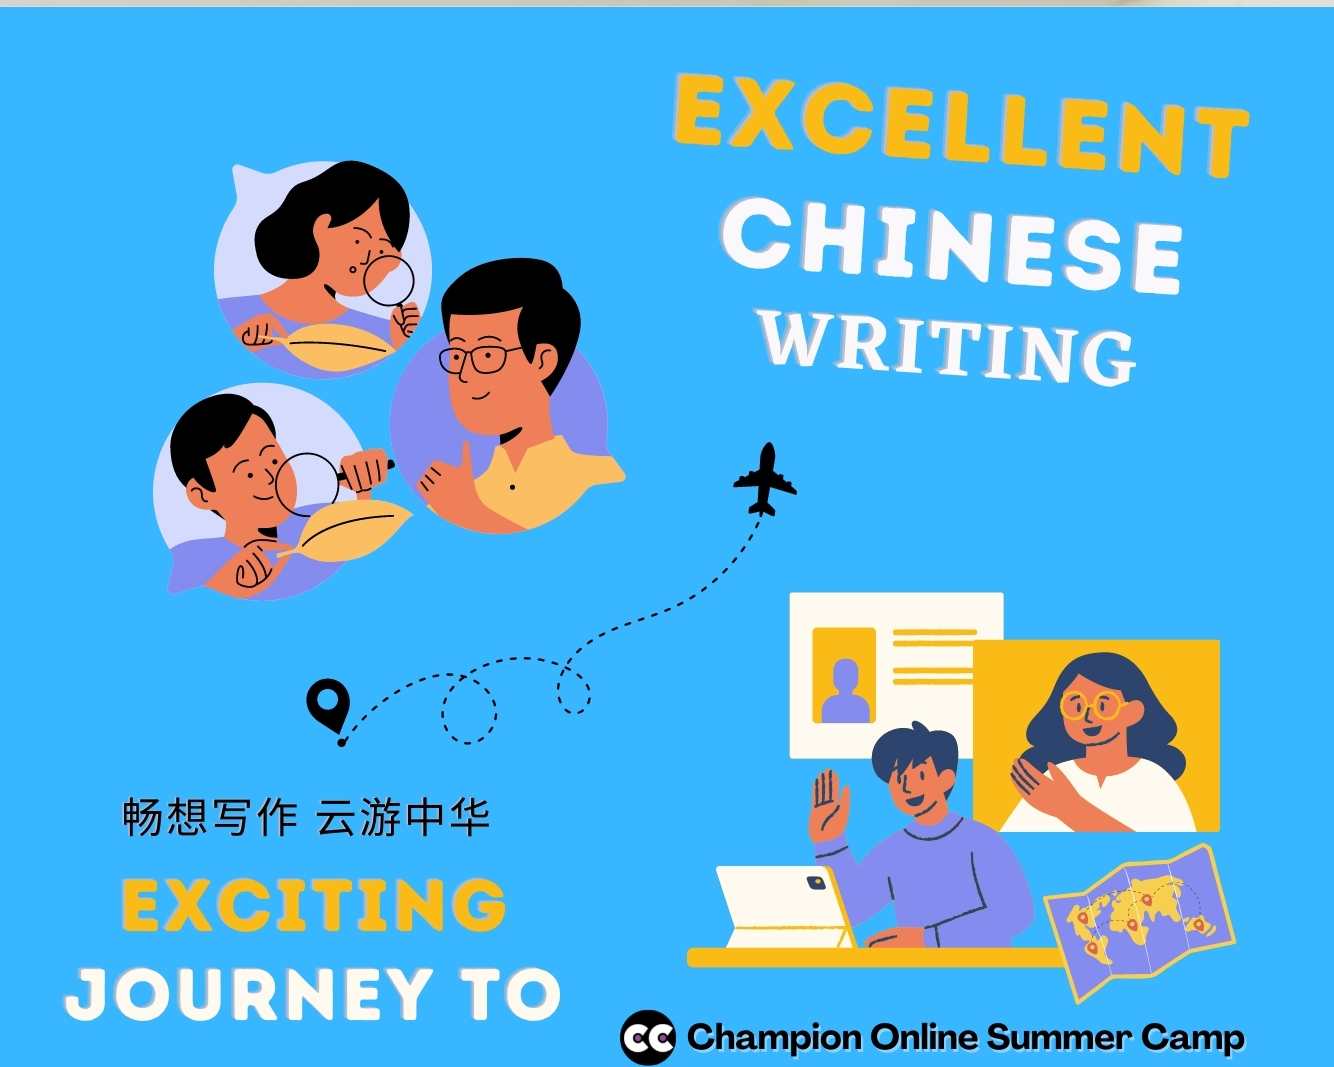 Exciting Journey to Excellent Writing: Literature & Art | G5+ *Mandarin Advanced